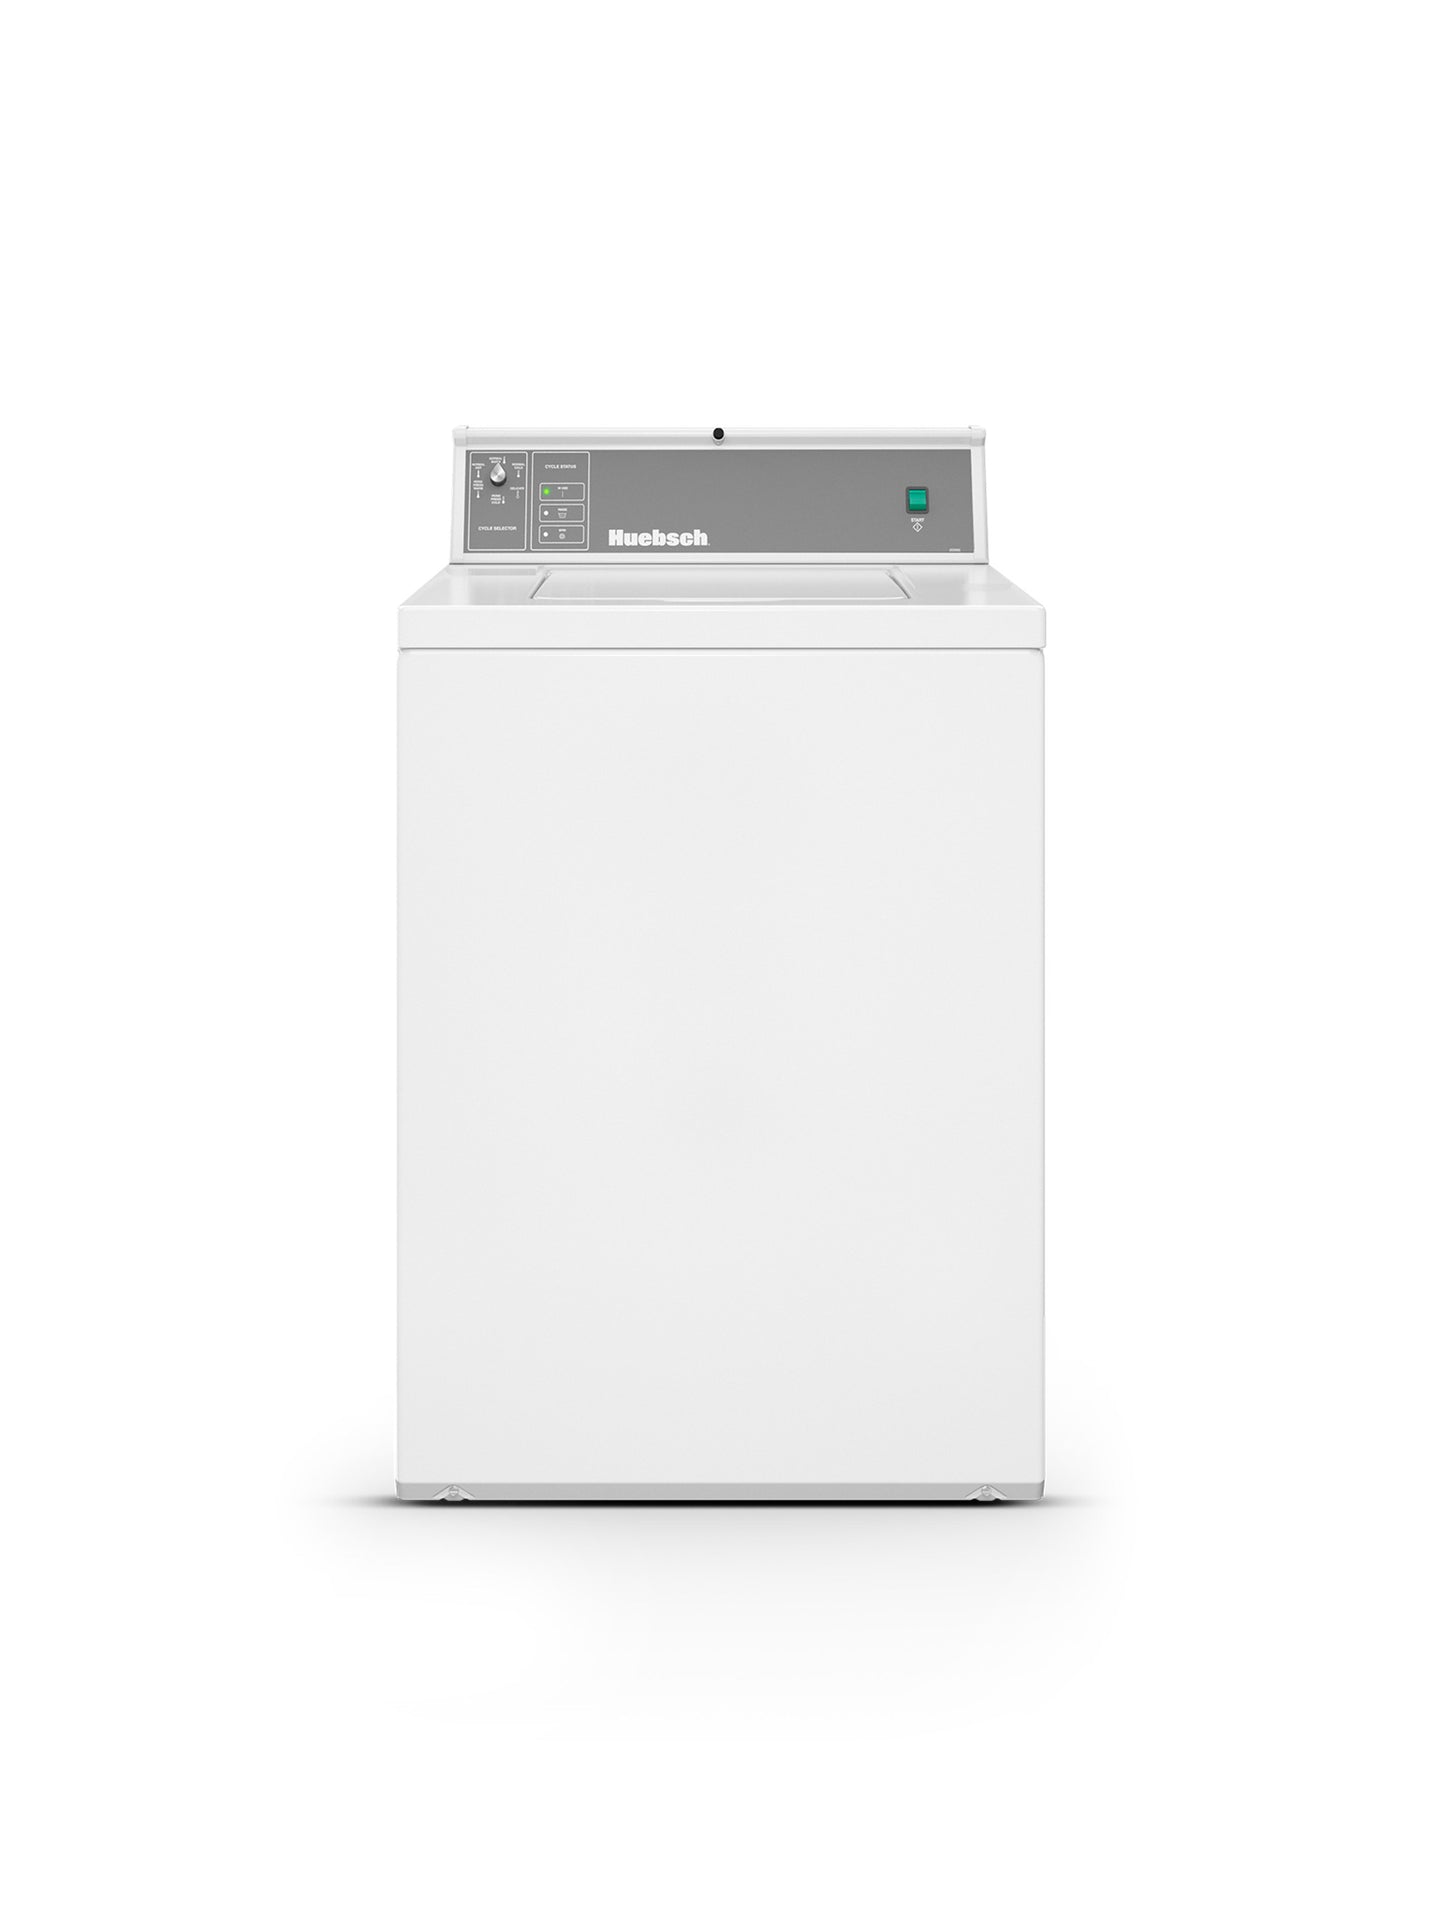 ON-PREMISE TOP LOAD WASHER - PUSH TO START